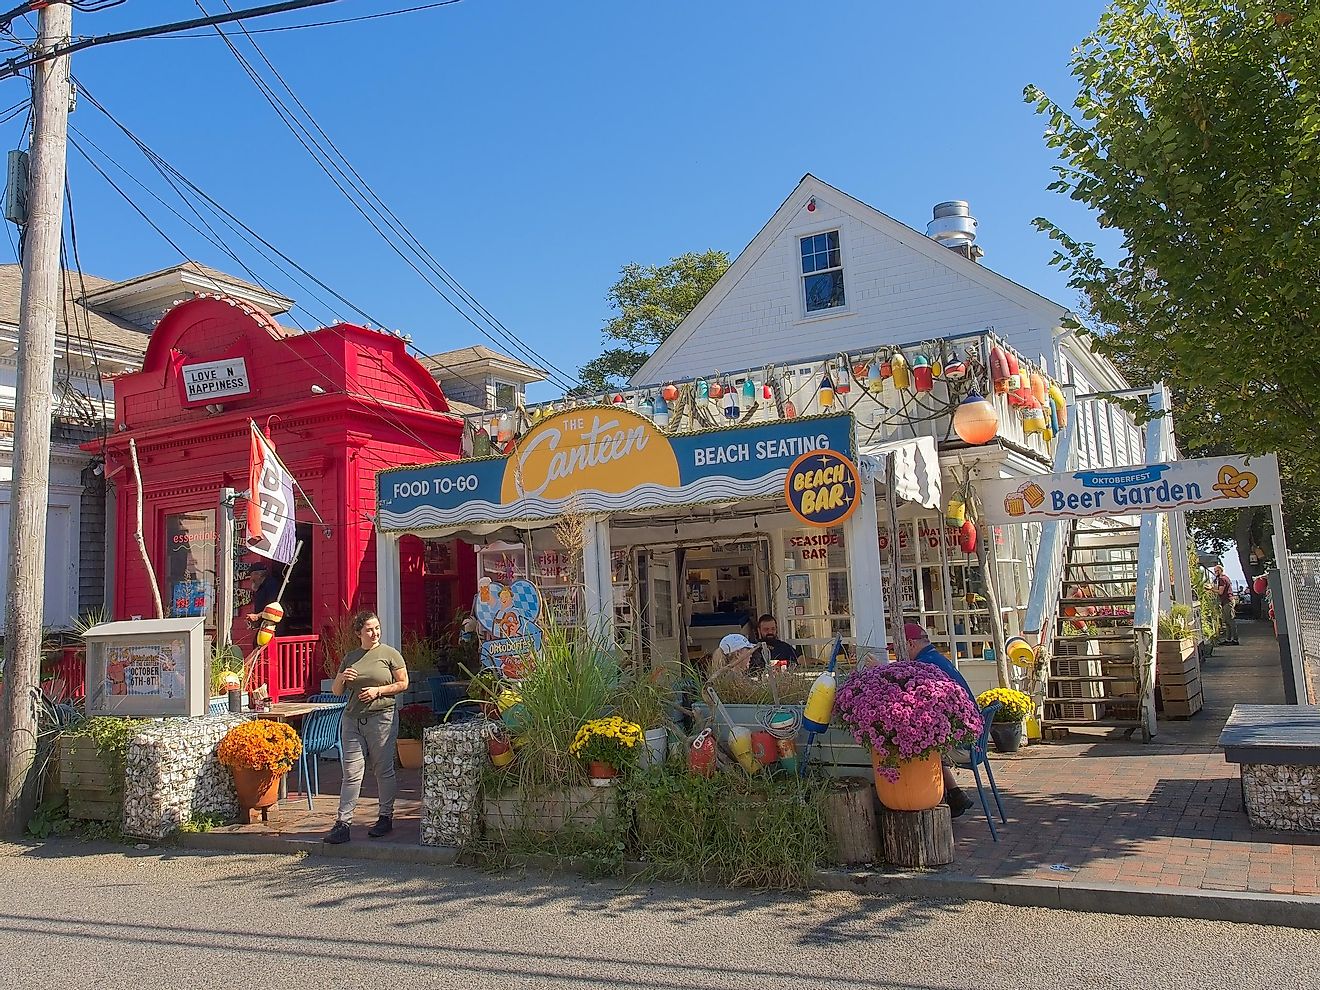 Busy shops and tourists in old town Provincetown, Cape Cod, Massachusetts, via Peter Blottman Photography / iStock.com